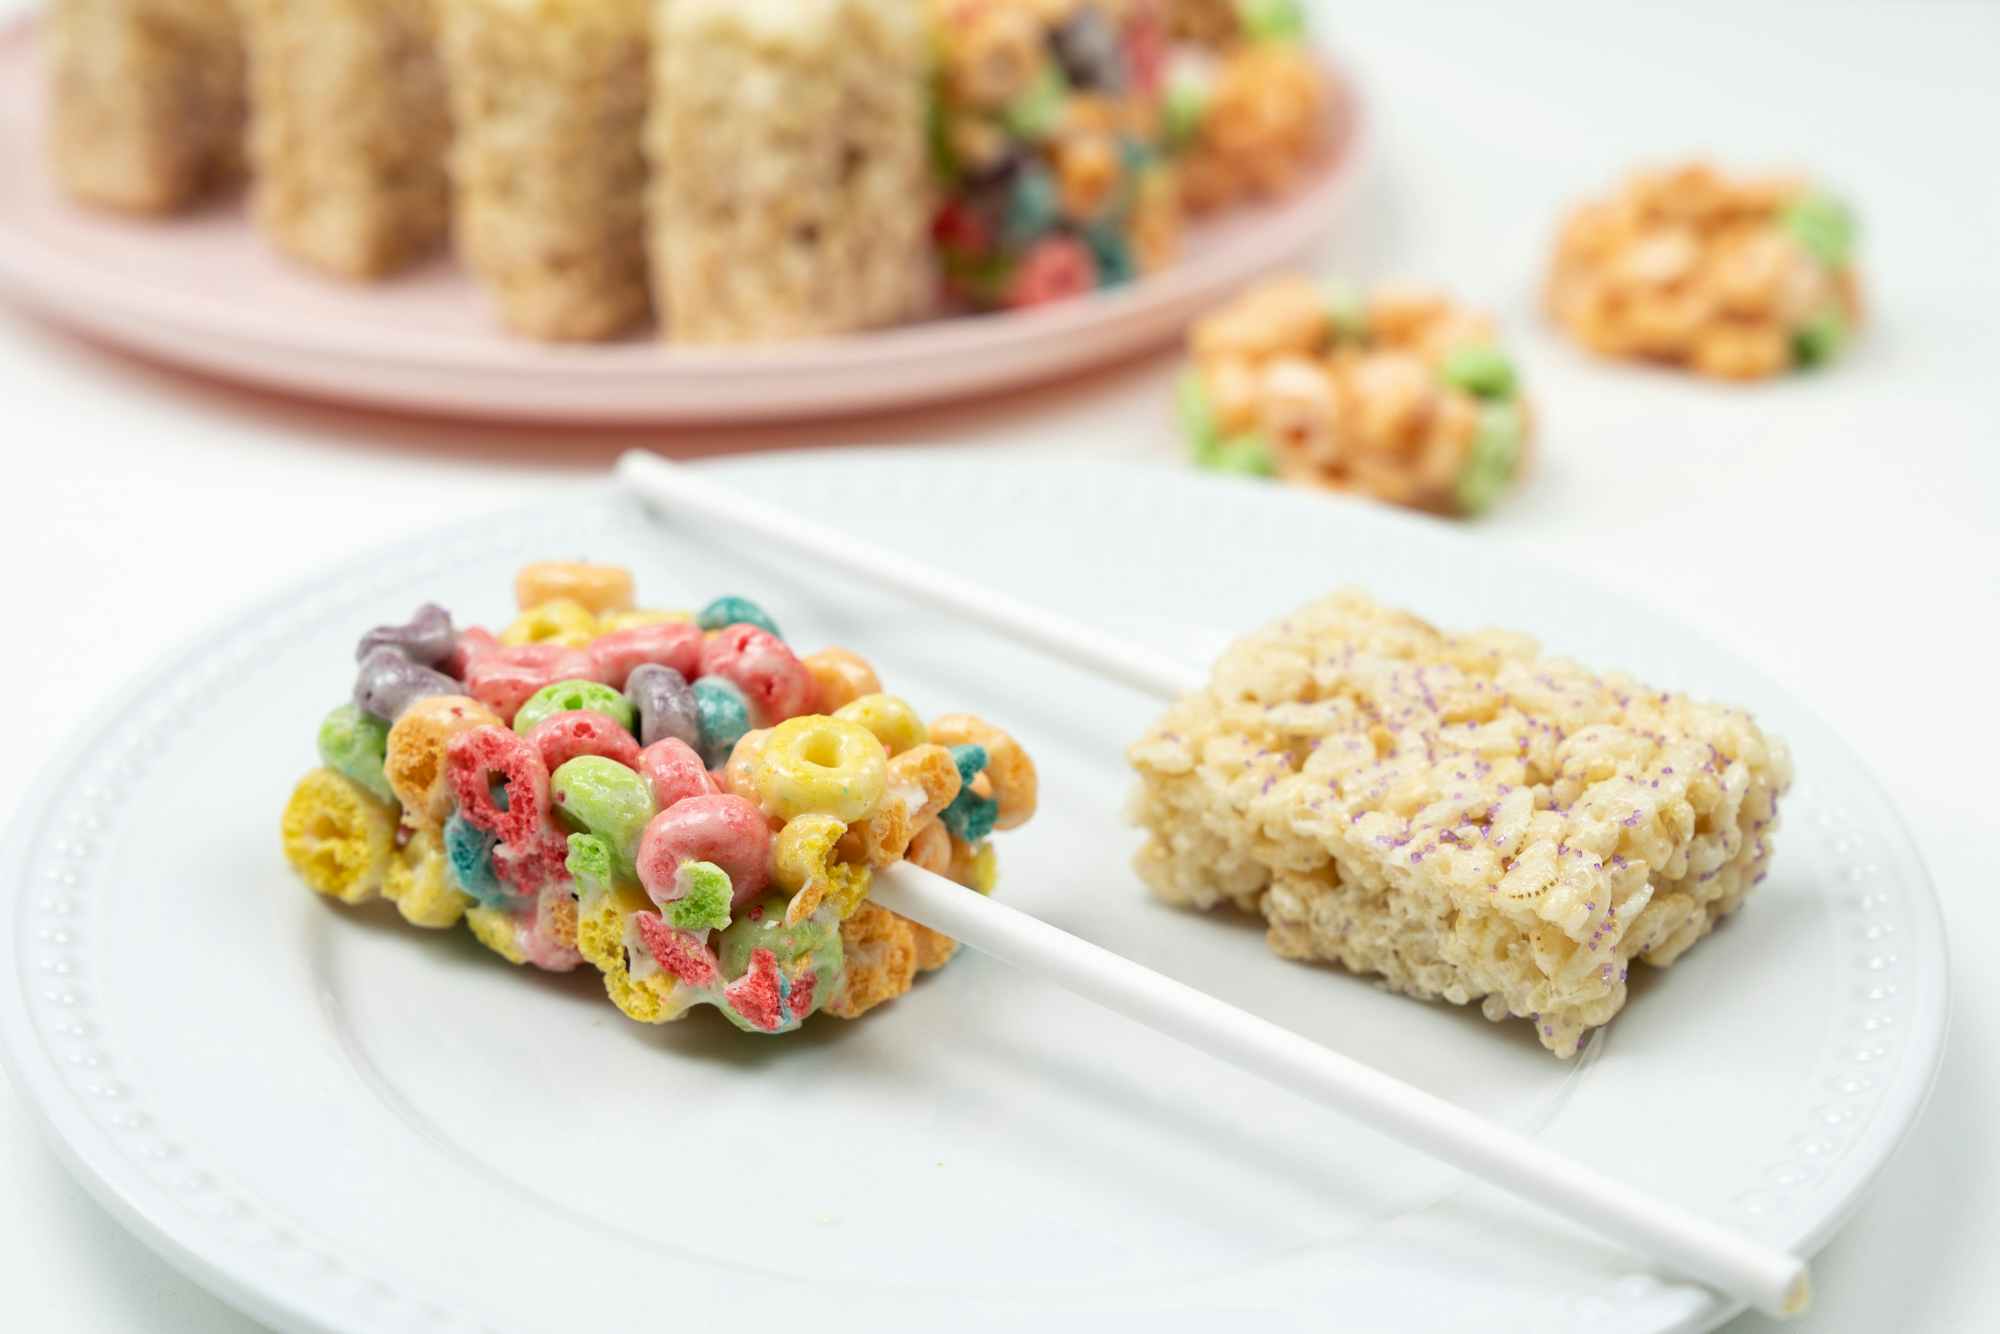 Some cereal marshmallow treats on a plate